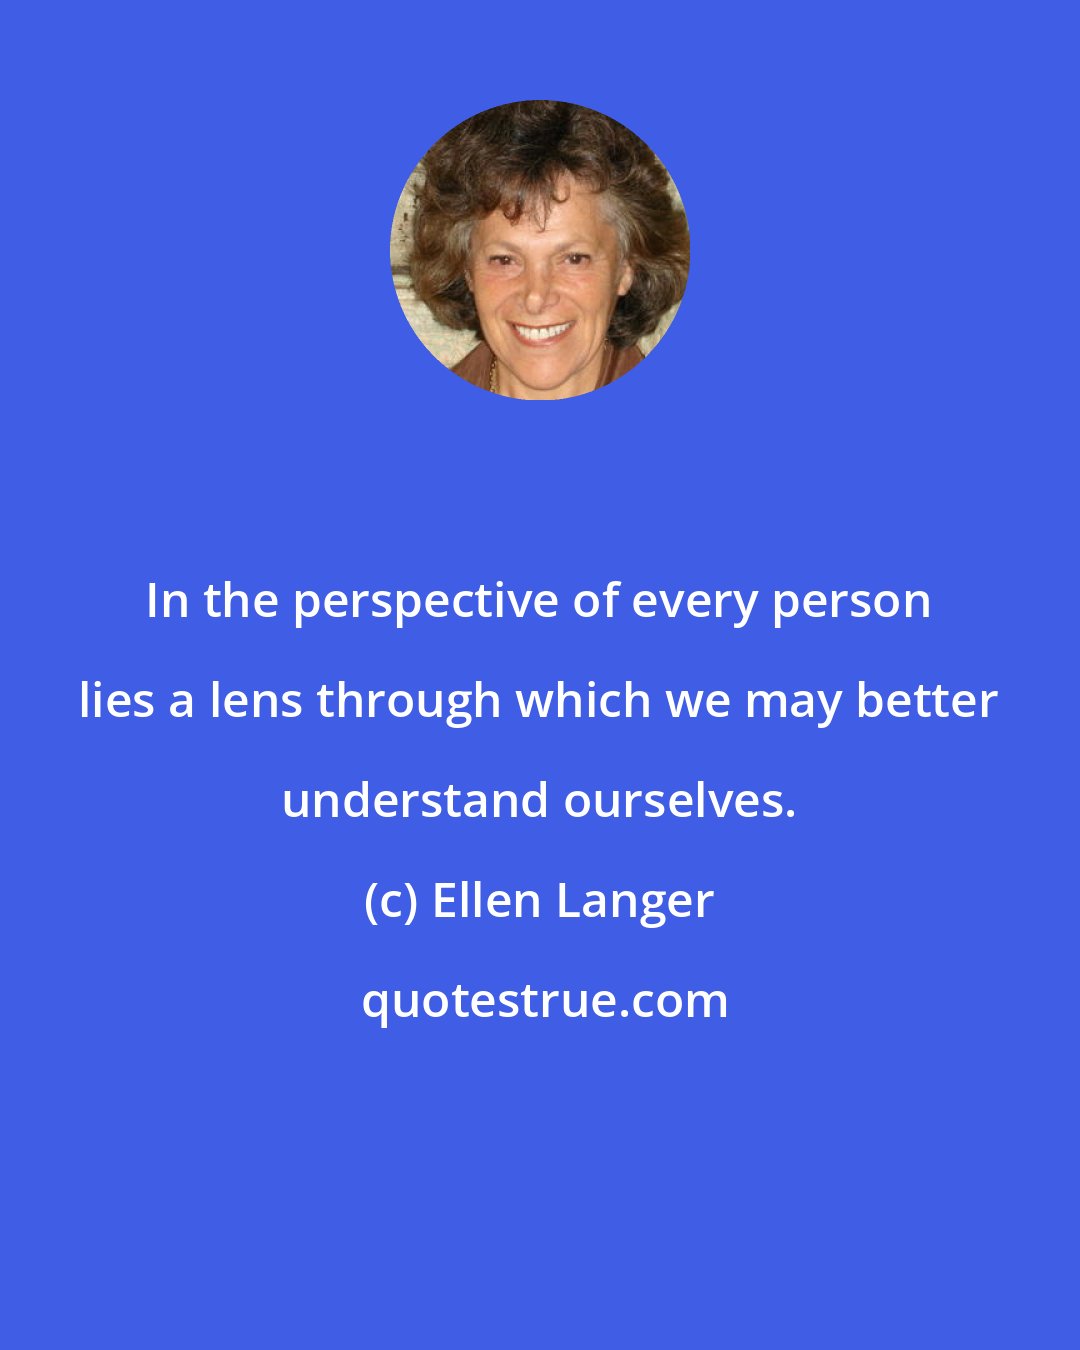 Ellen Langer: In the perspective of every person lies a lens through which we may better understand ourselves.